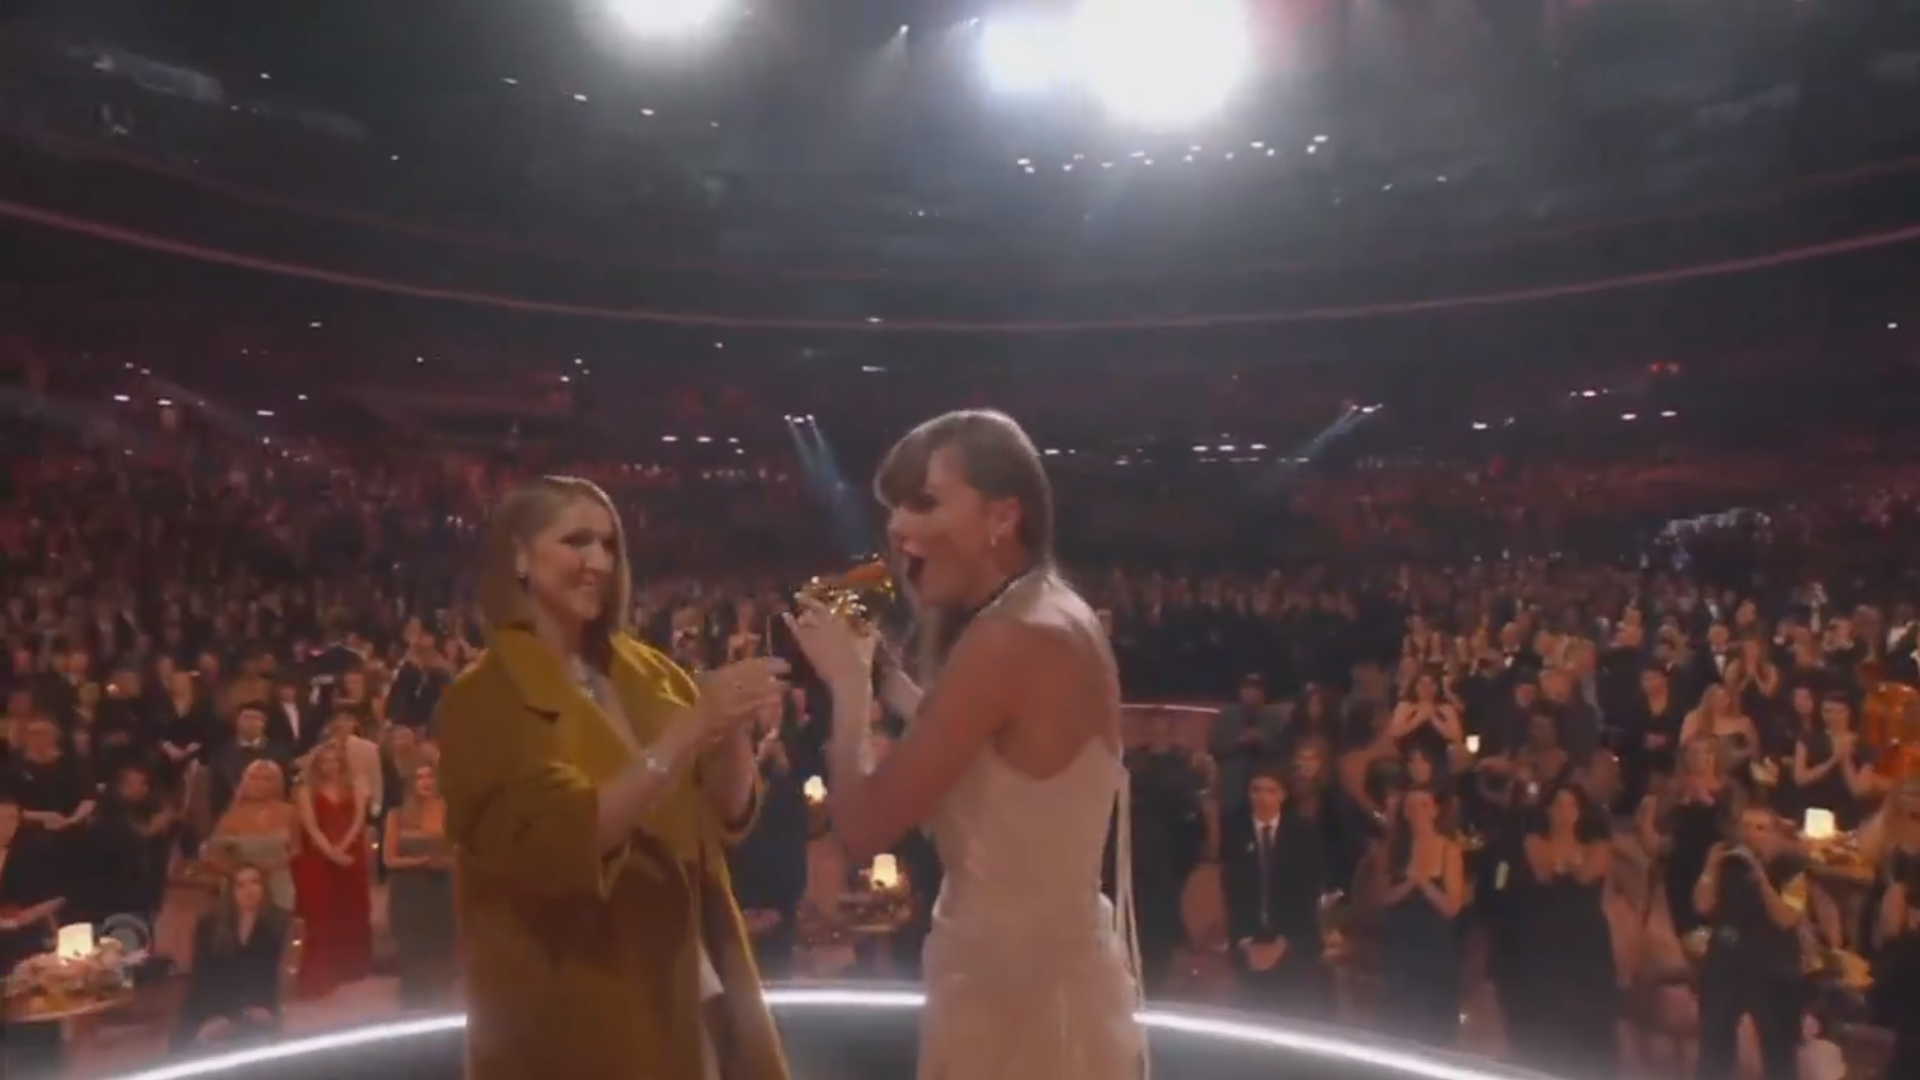 “Taylor Swift just took the album of the year trophy from Celine Dion without batting an eye and/or acknowledging that a legendary [GOAT] was handing her the award. So cringey for my soul”, wrote one user. (Photo: X)